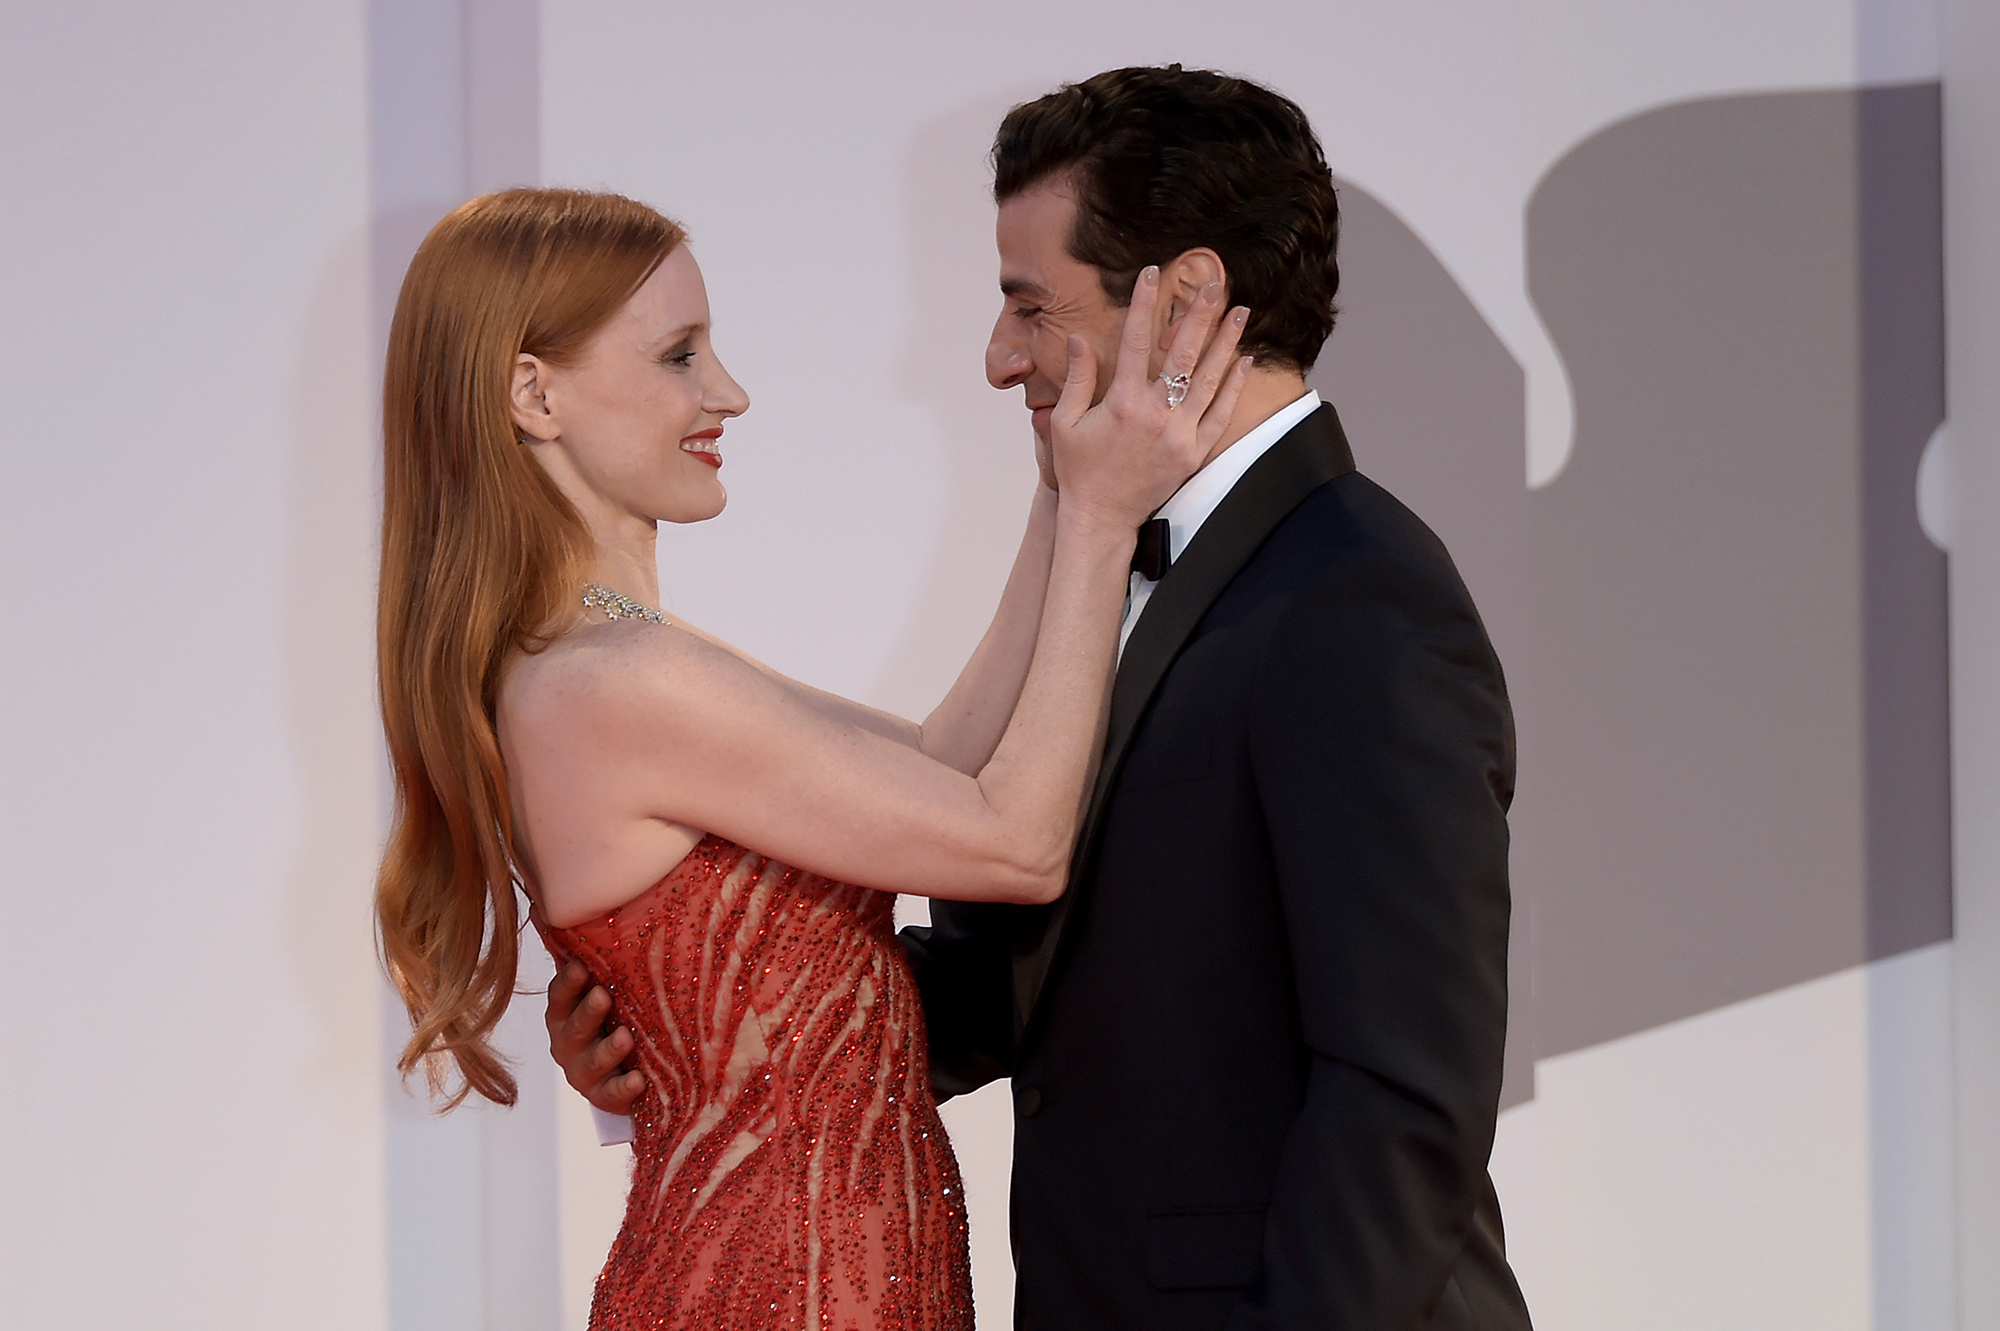 Jessica Chastain and Oscar Isaac Show Chemistry on Red Carpet photo